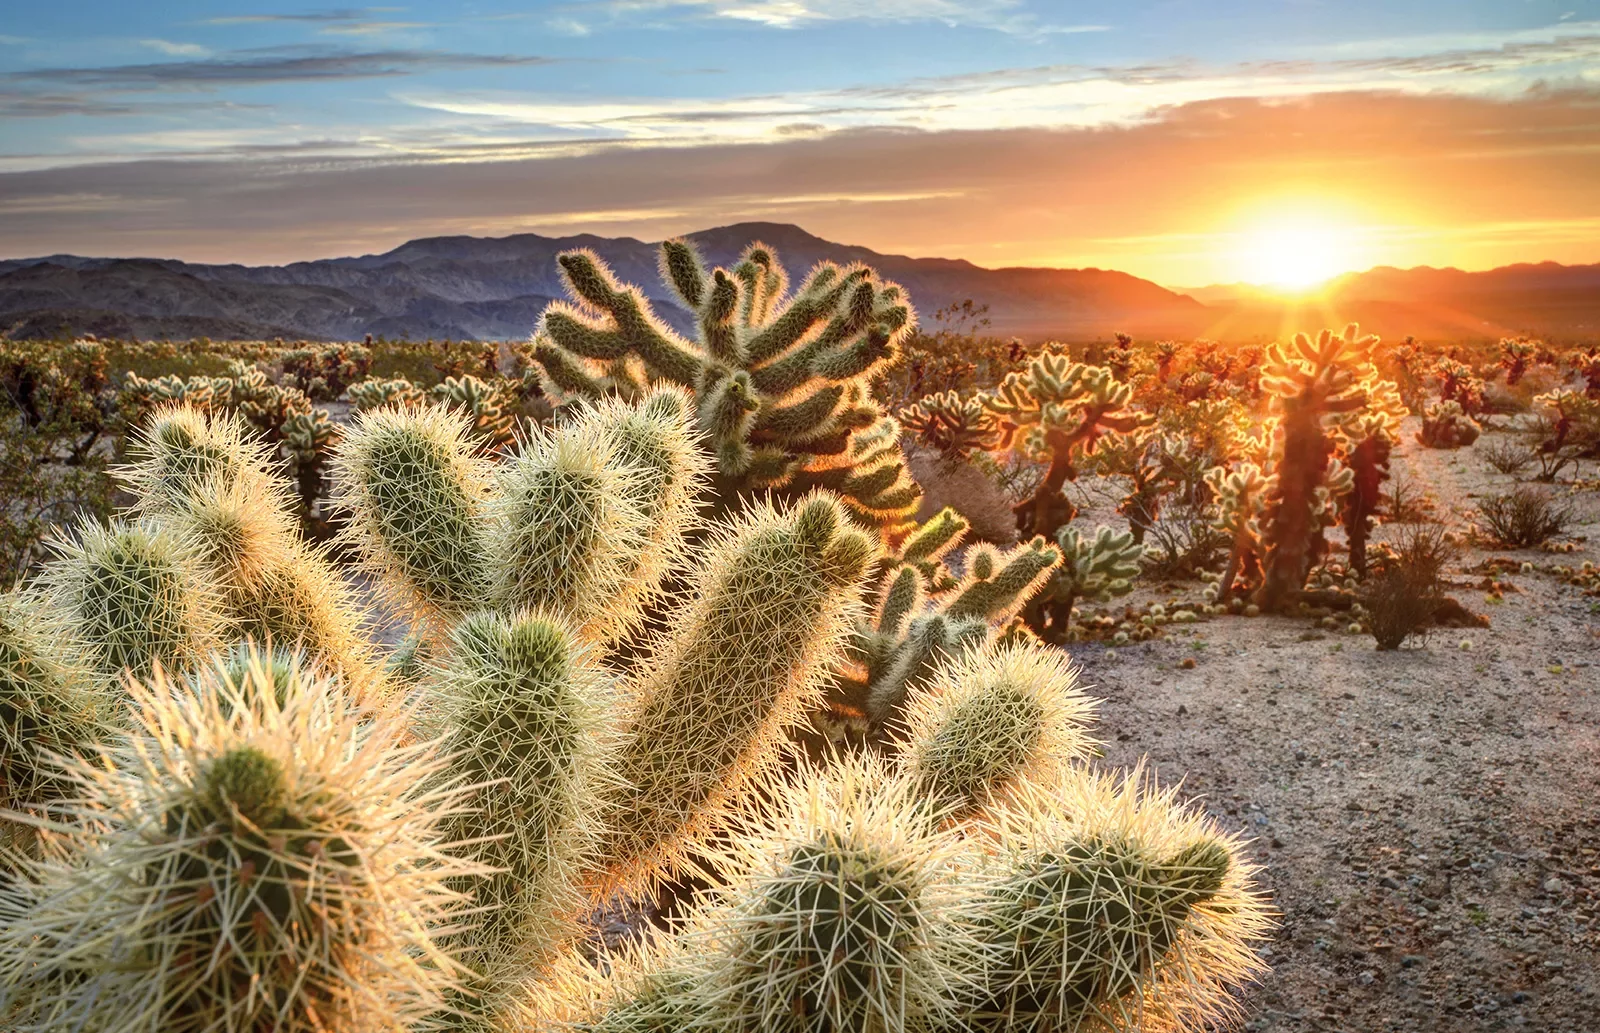 Field of cactus plants, sunset in background.